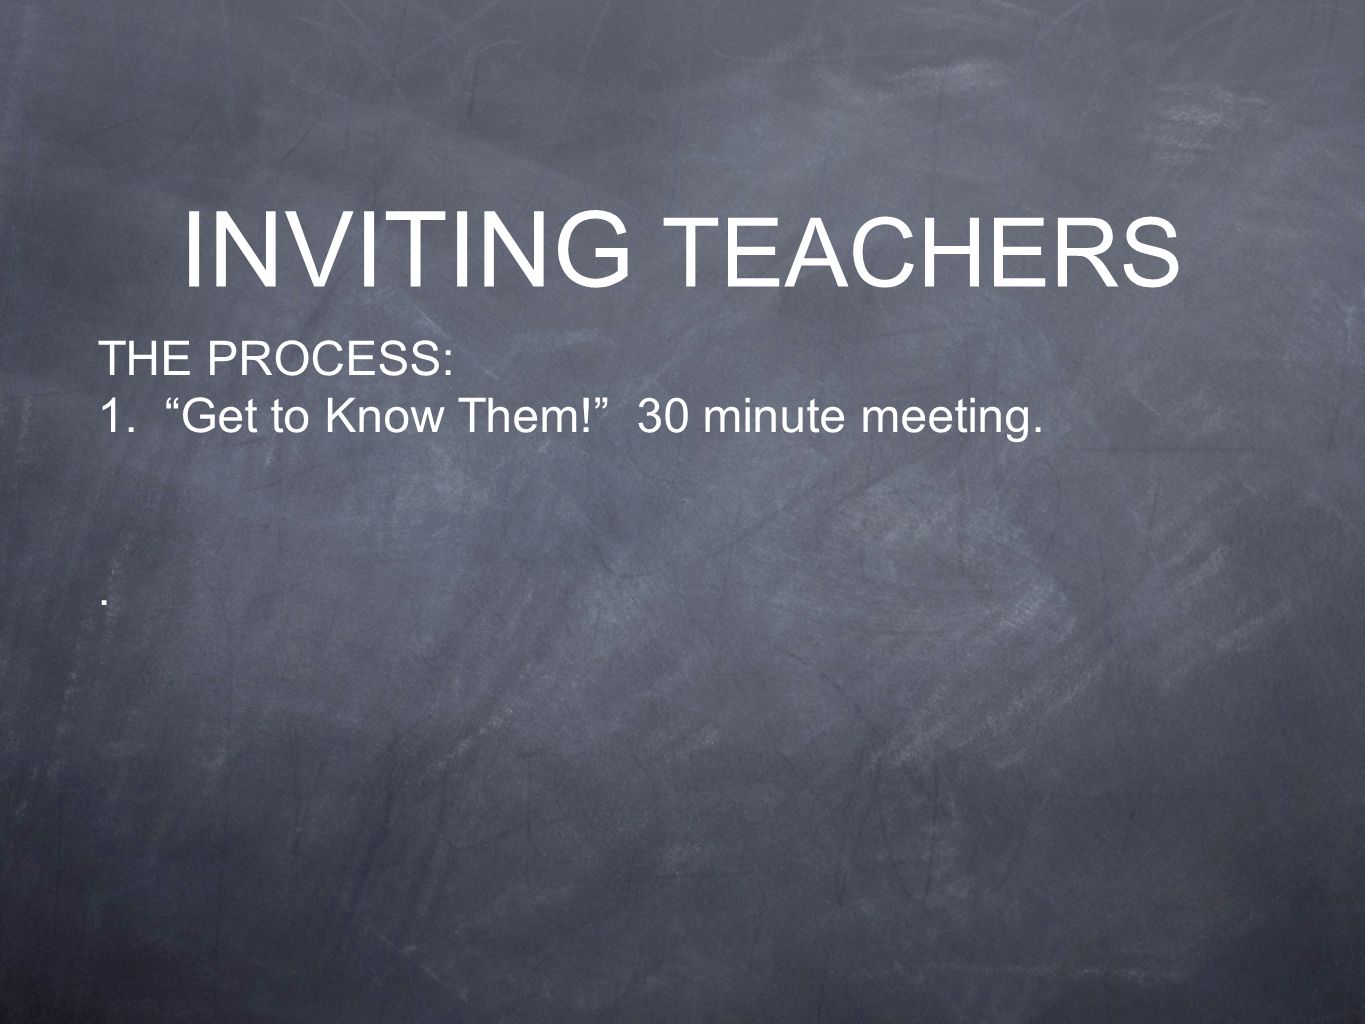 THE PROCESS: 1. Get to Know Them! 30 minute meeting.. INVITING TEACHERS